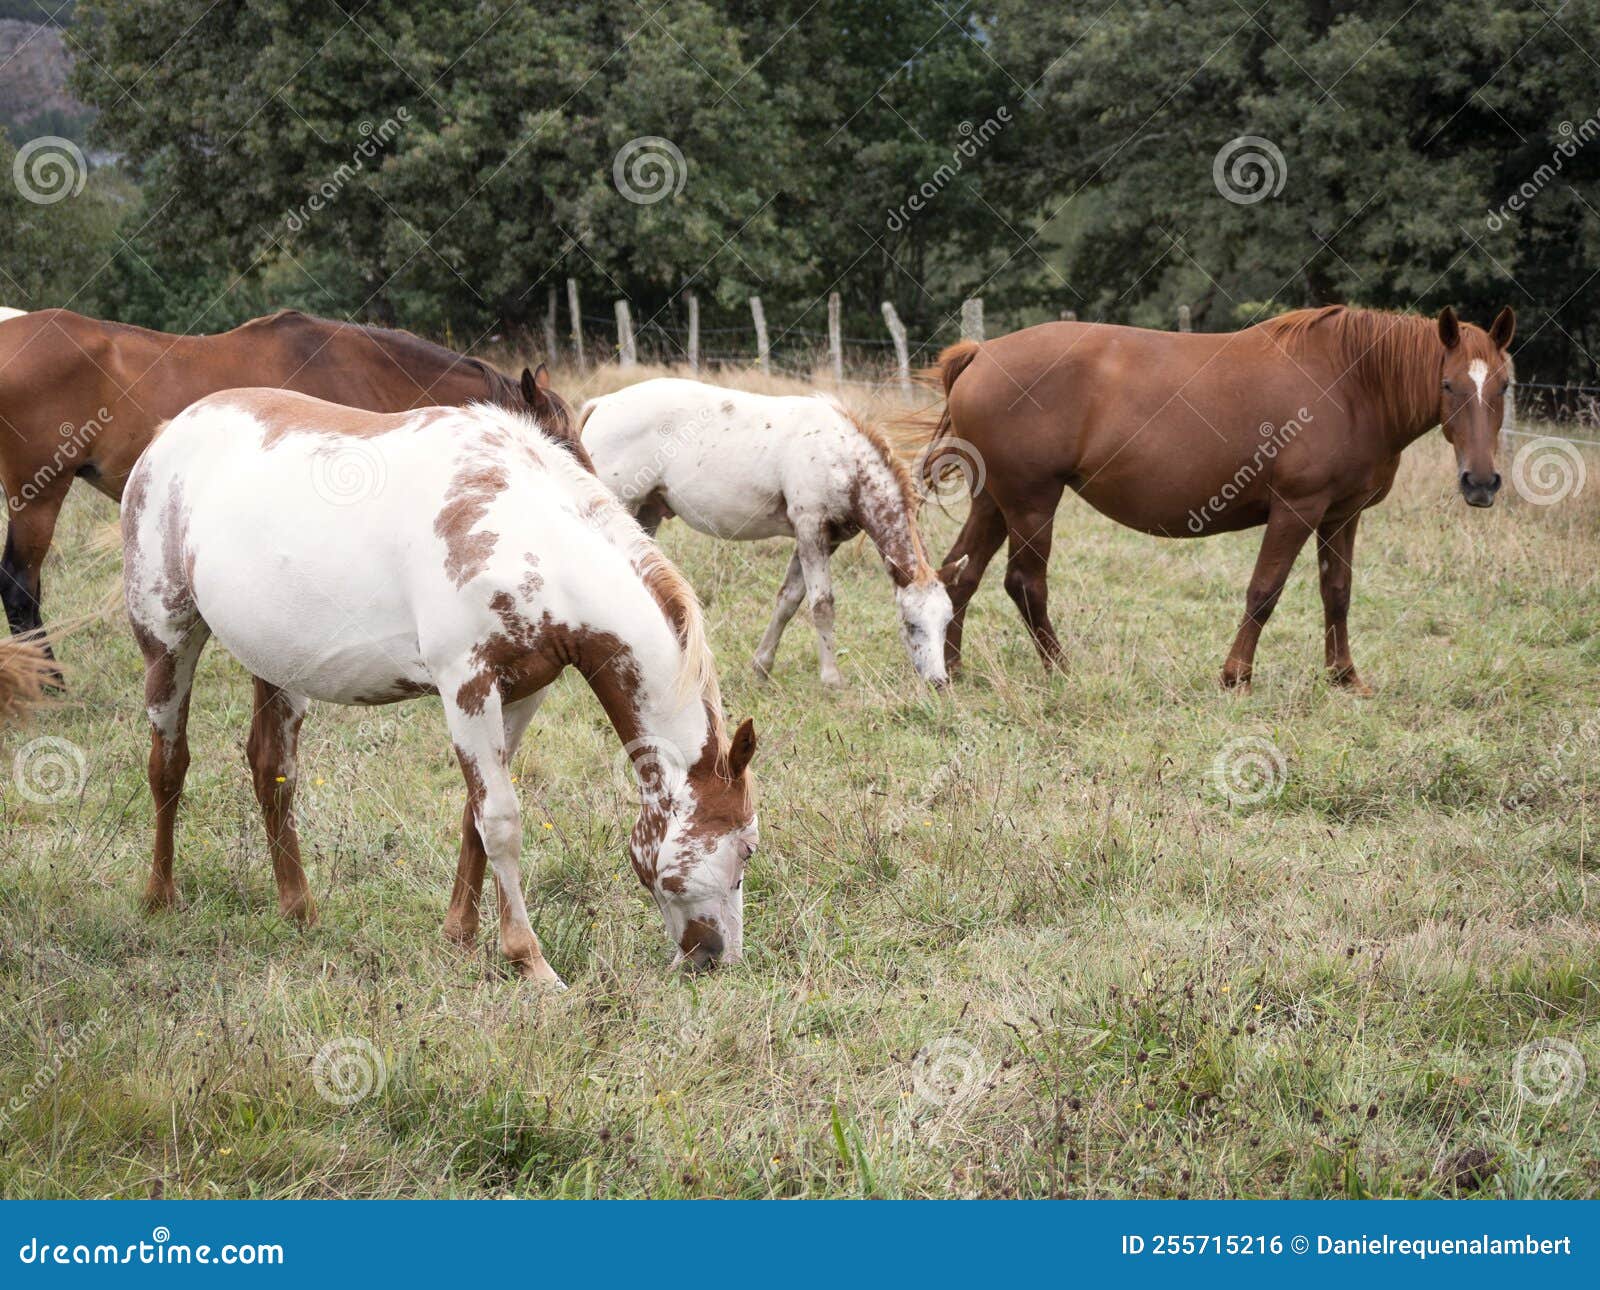 herd of american pain horse and hispano breton mares grazing on a summer field.